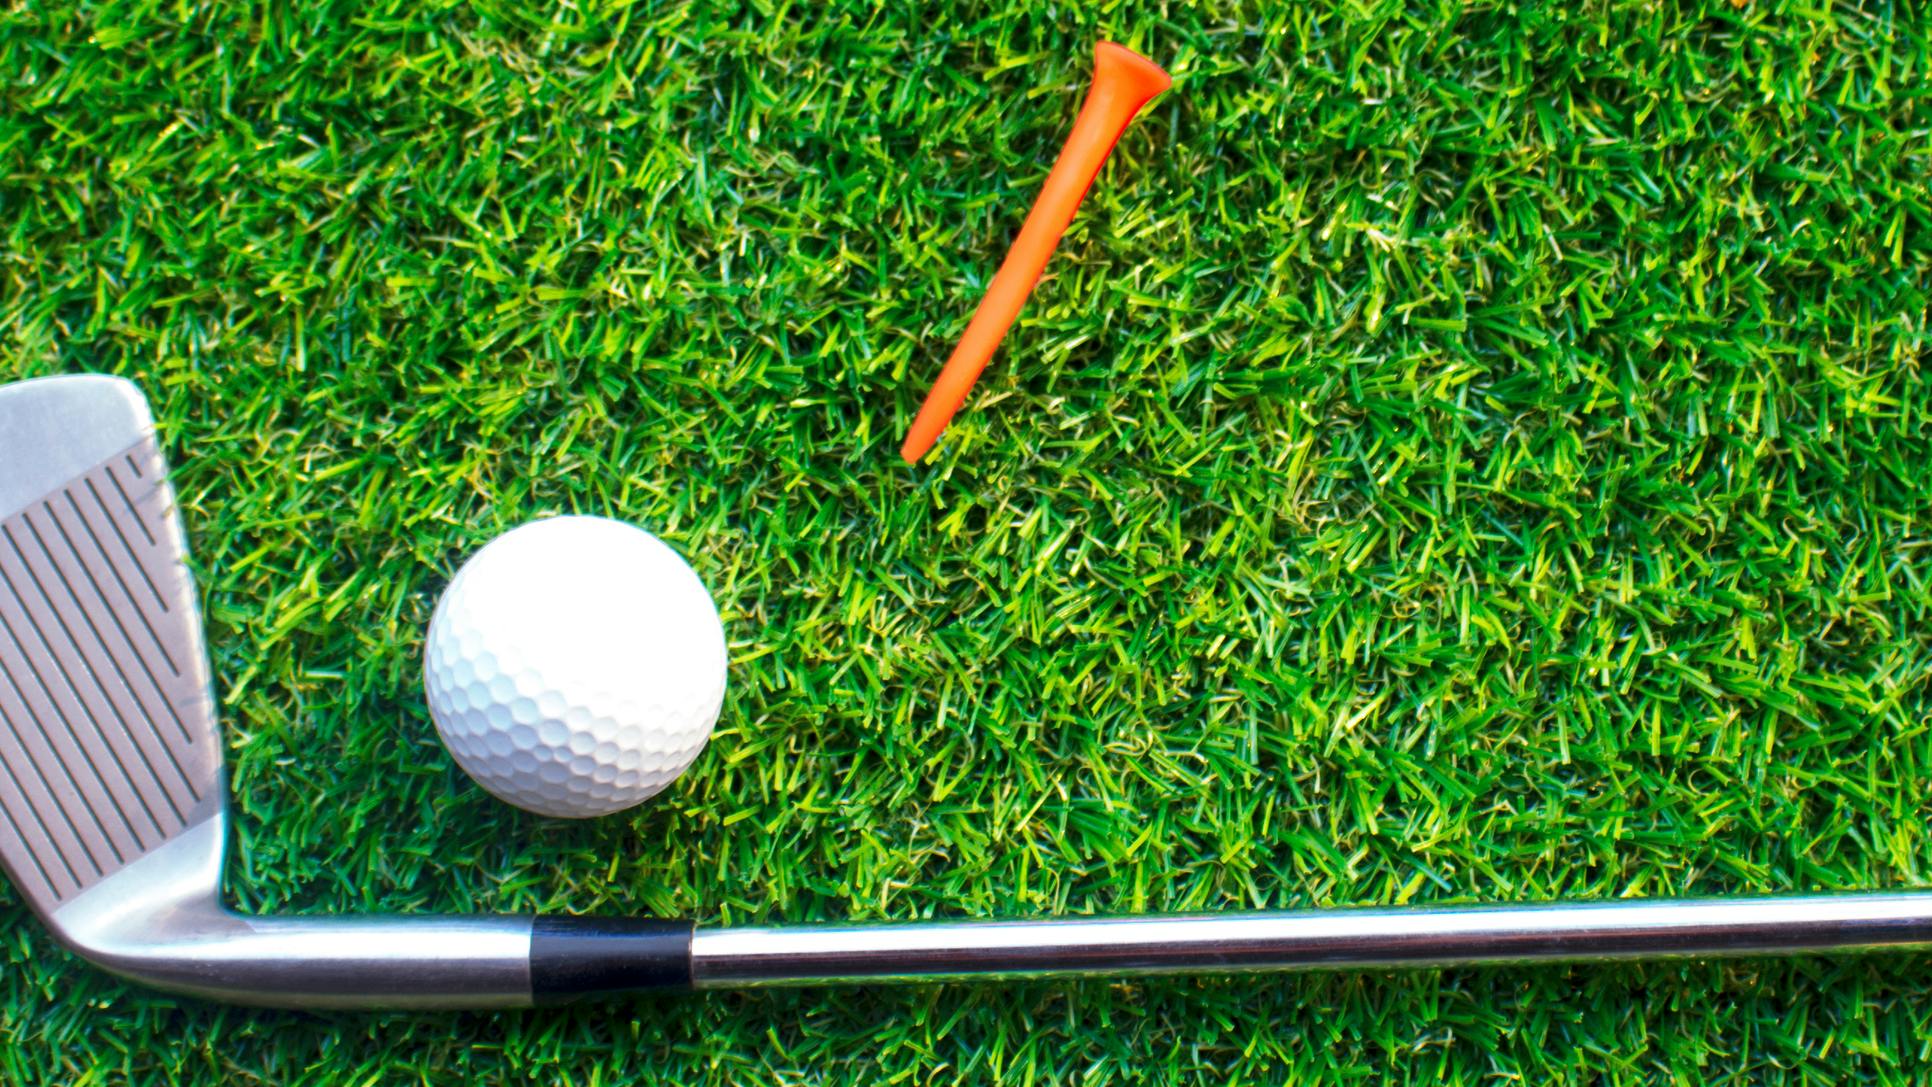 A golf club rests on the grass next to a golf ball and an orange tee